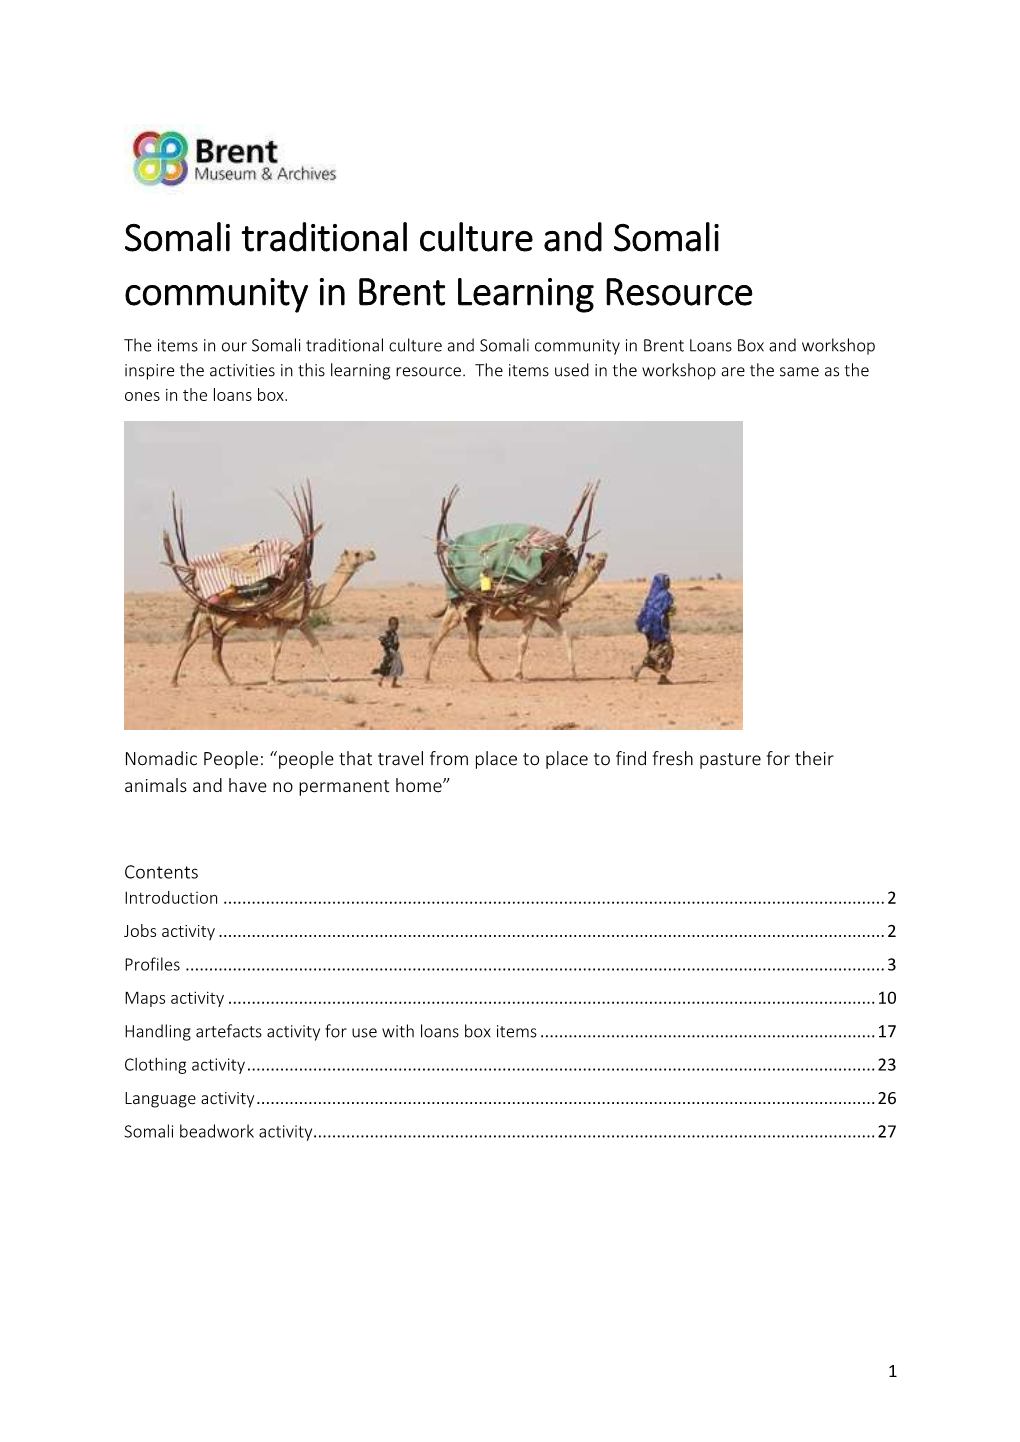 Somali Traditional Culture and Community in Brent